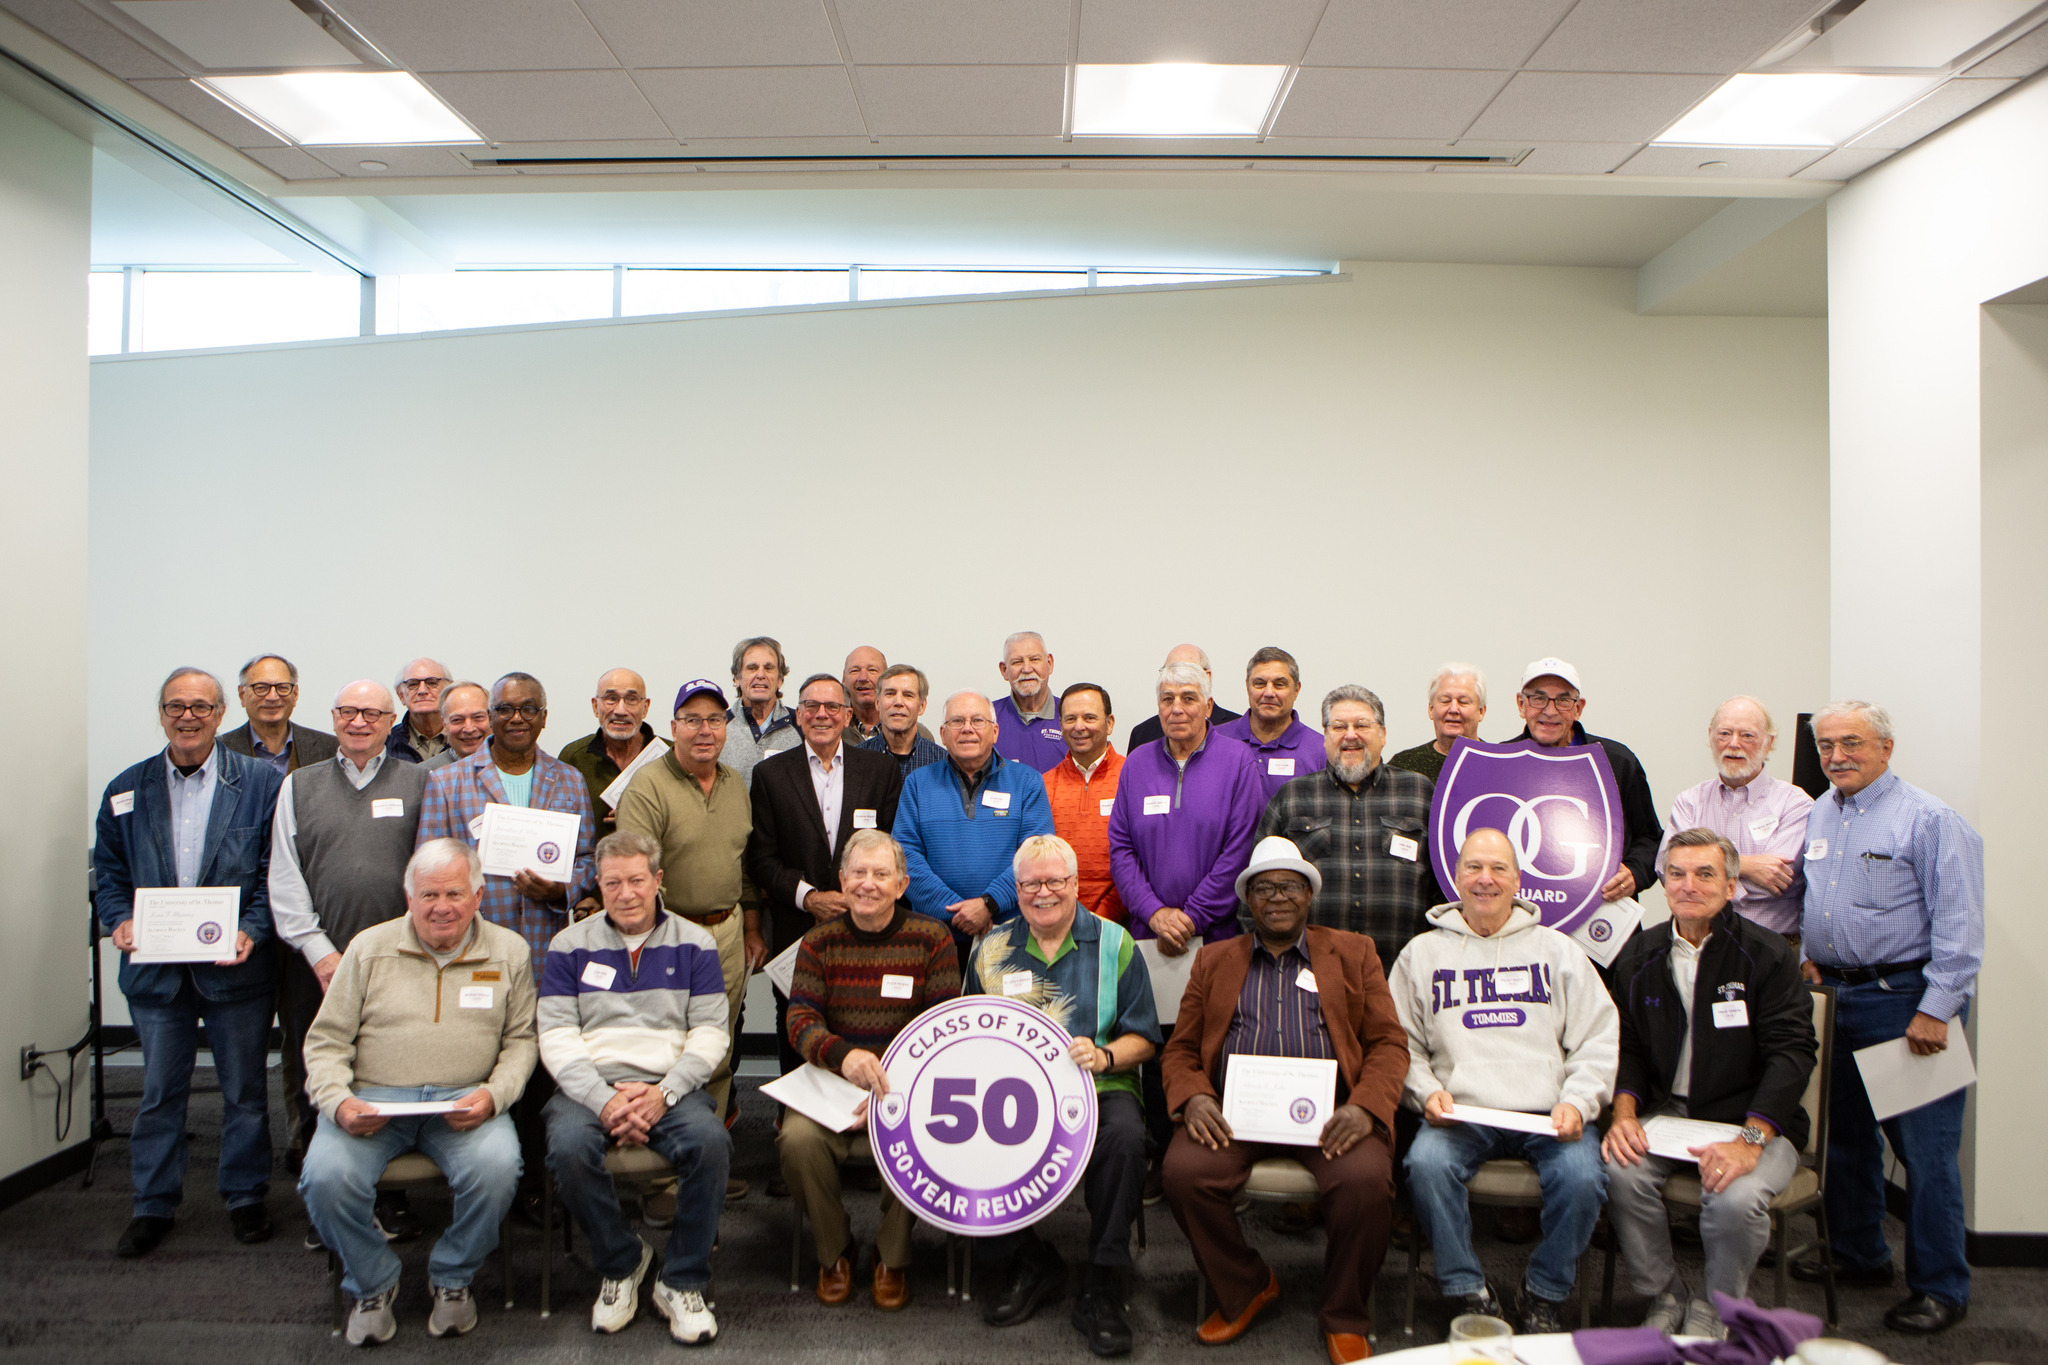 Group photo of the Class of 1973 and Old Guard members at the 2022 reunion